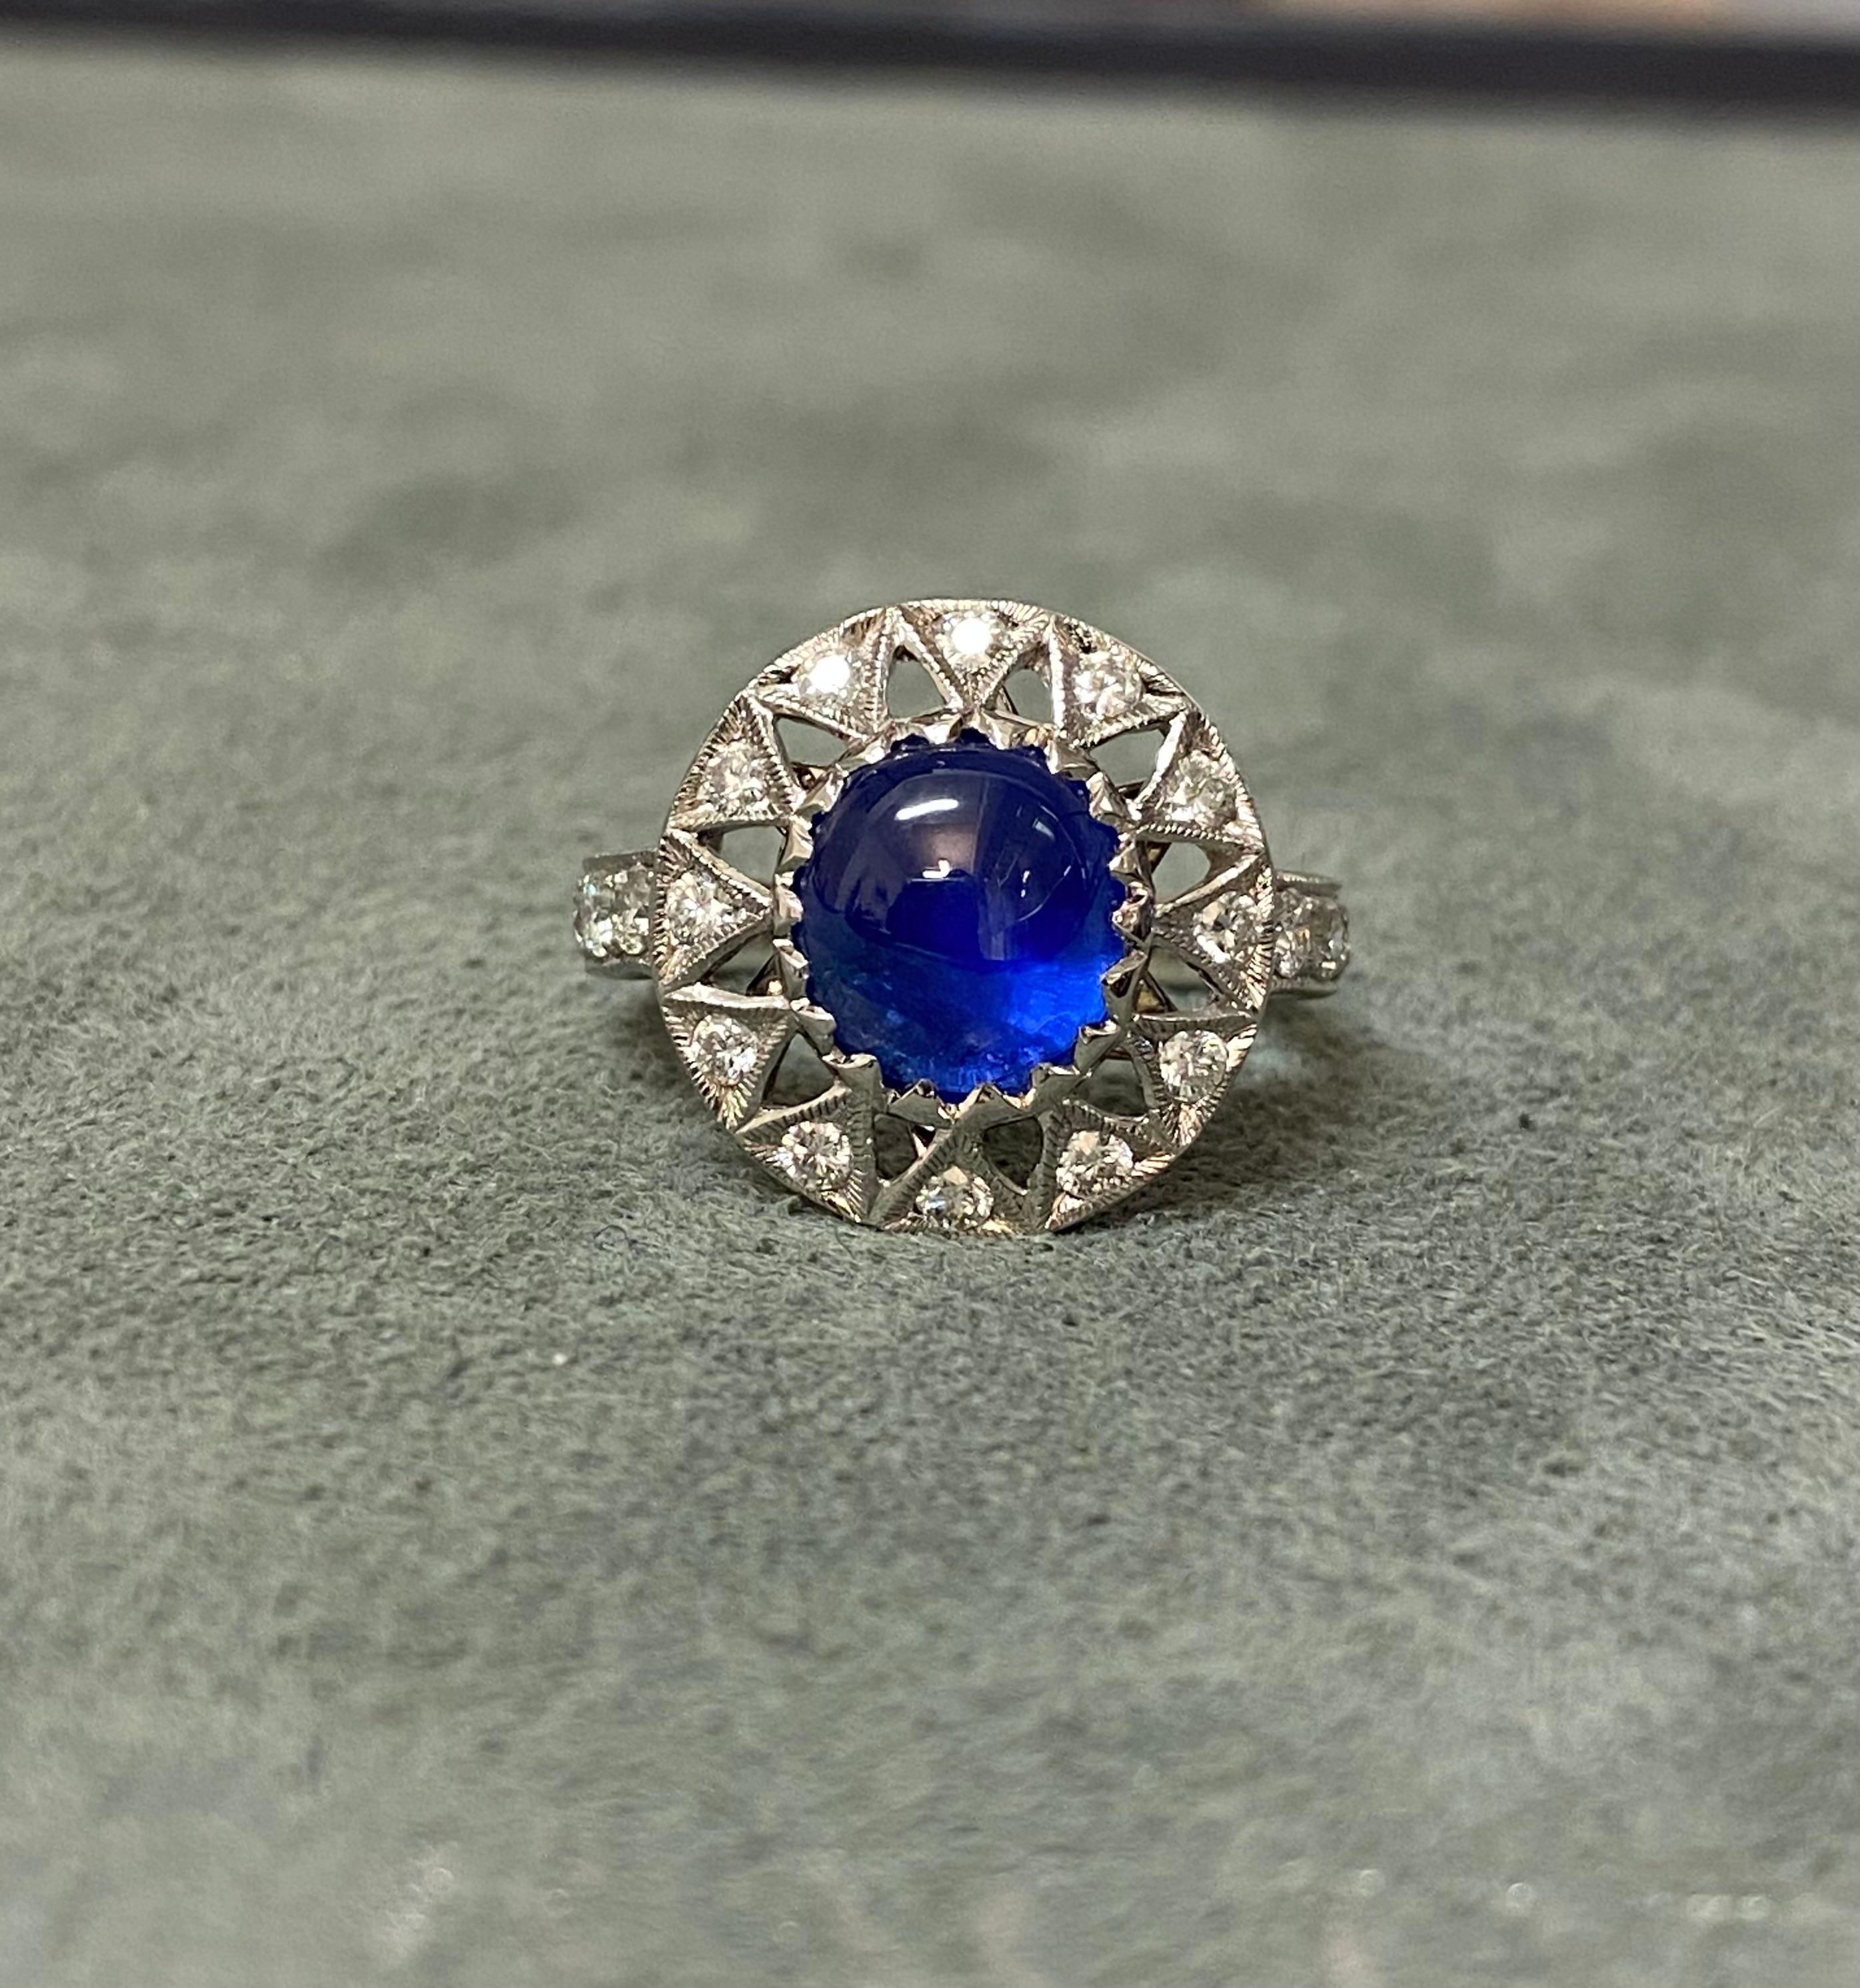 A beautiful blue cabochon cut sapphire of 3.85ct, set with diamonds (0.64ct, G-H SI) in white gold. The sapphire displays a slight star (asterism) under certain light conditions. 